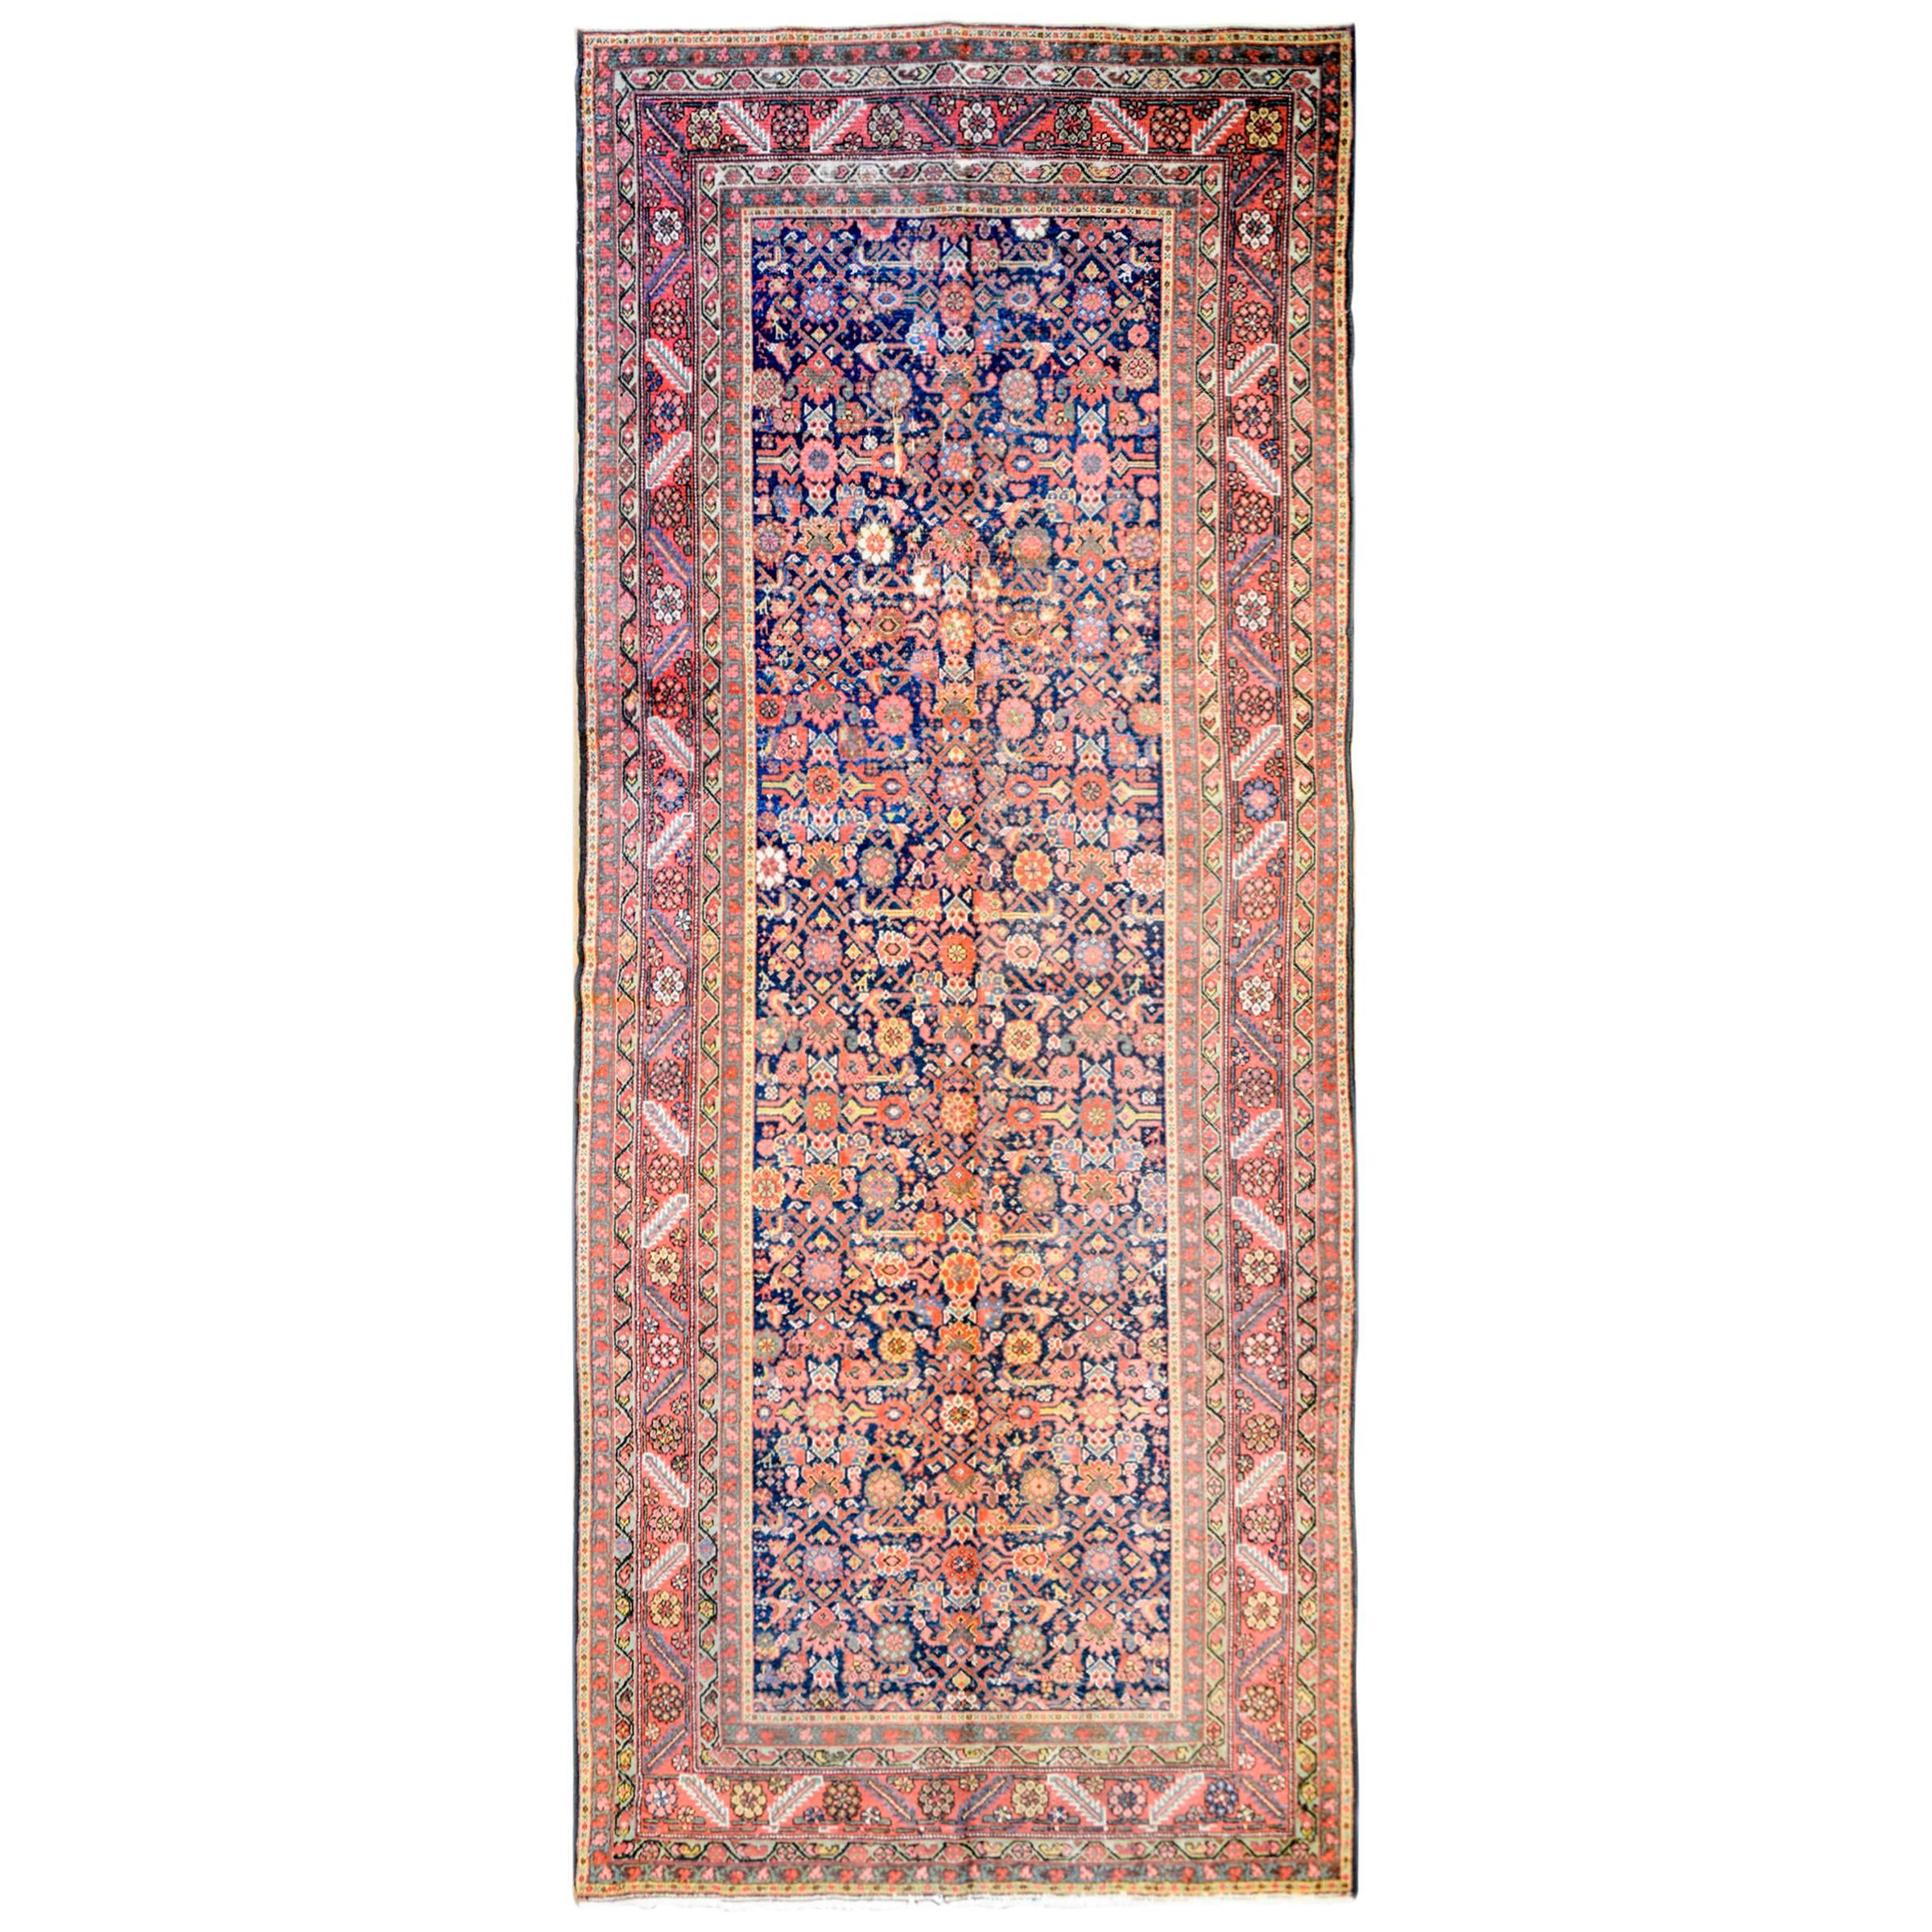 Exceptional Early 20th Century Malayar Herati Rug For Sale